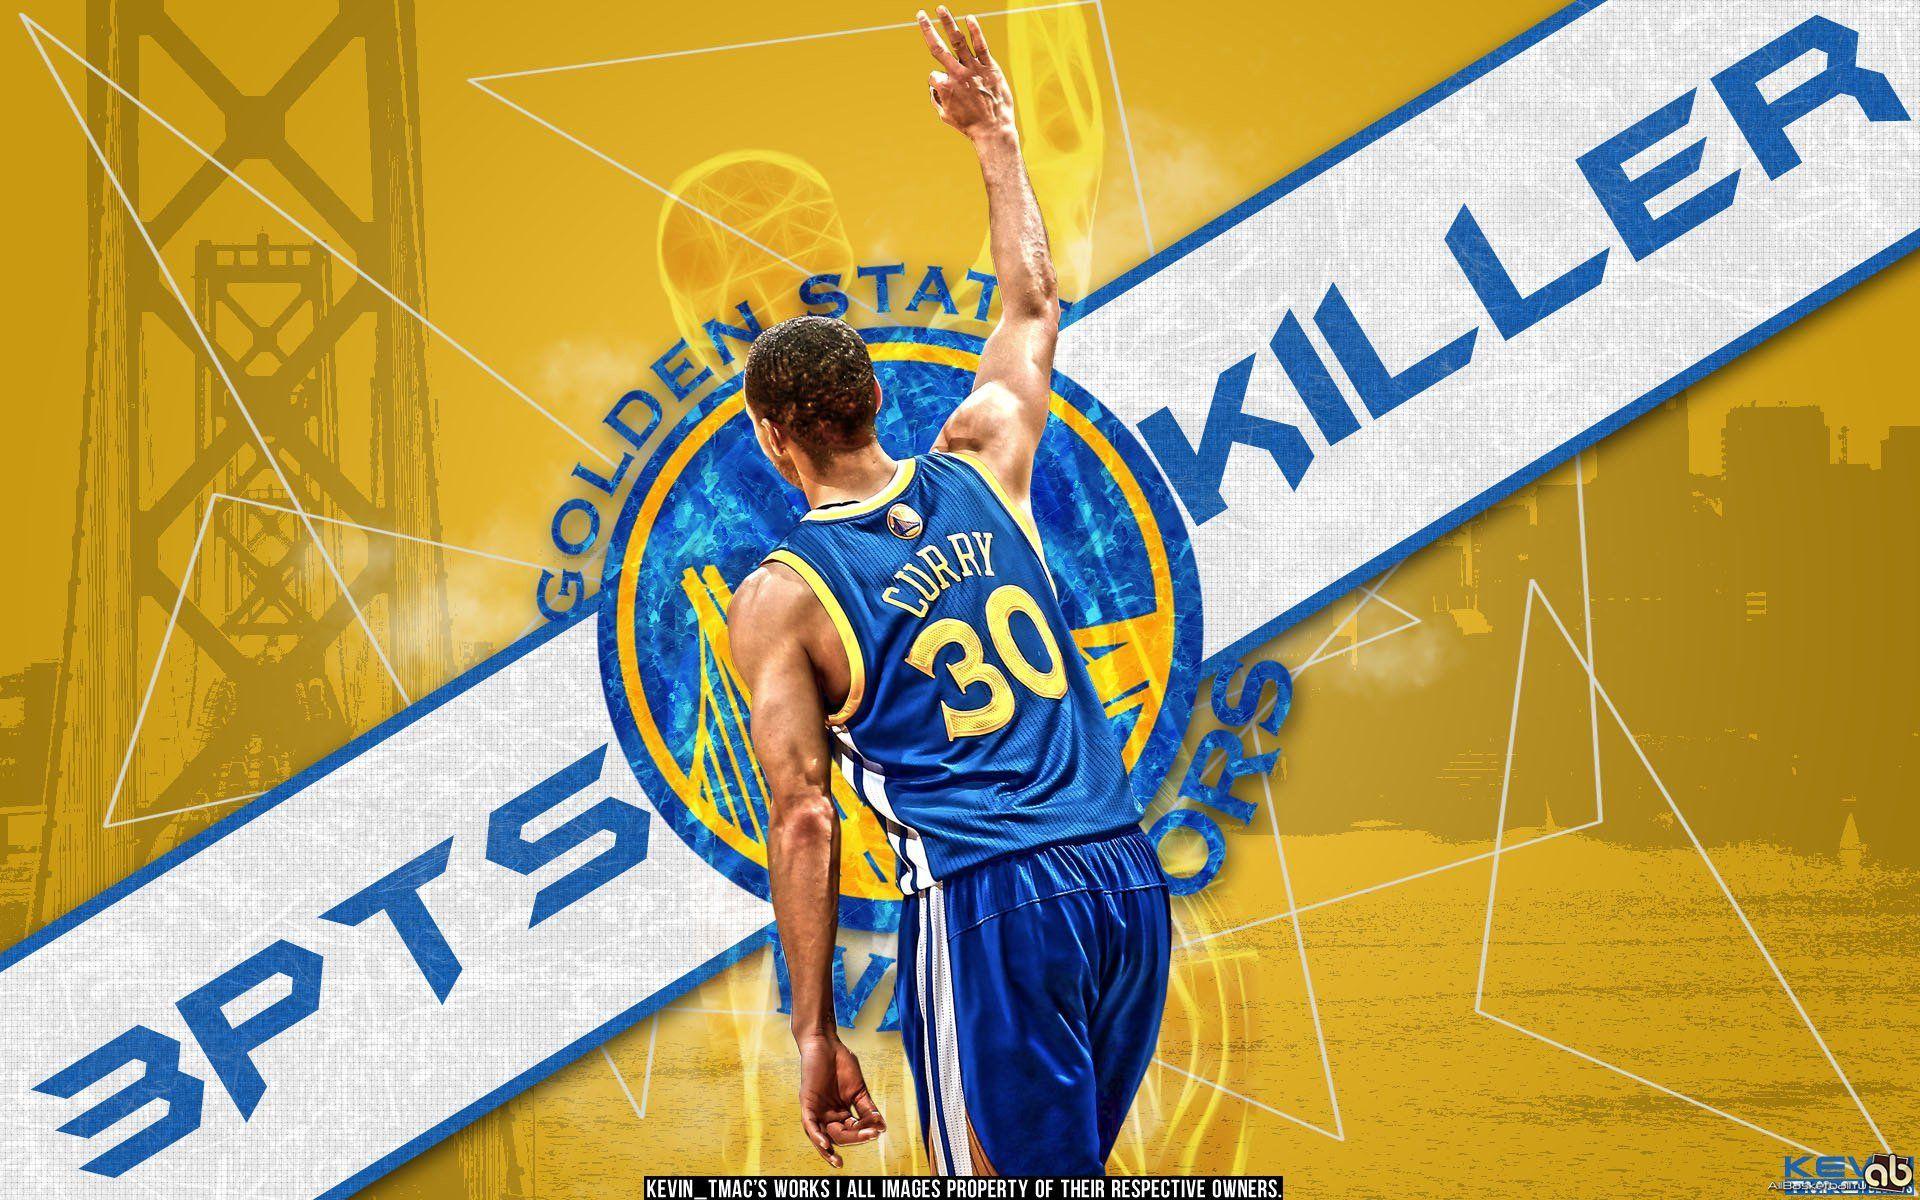 Stephen Curry wallpaper HD free download